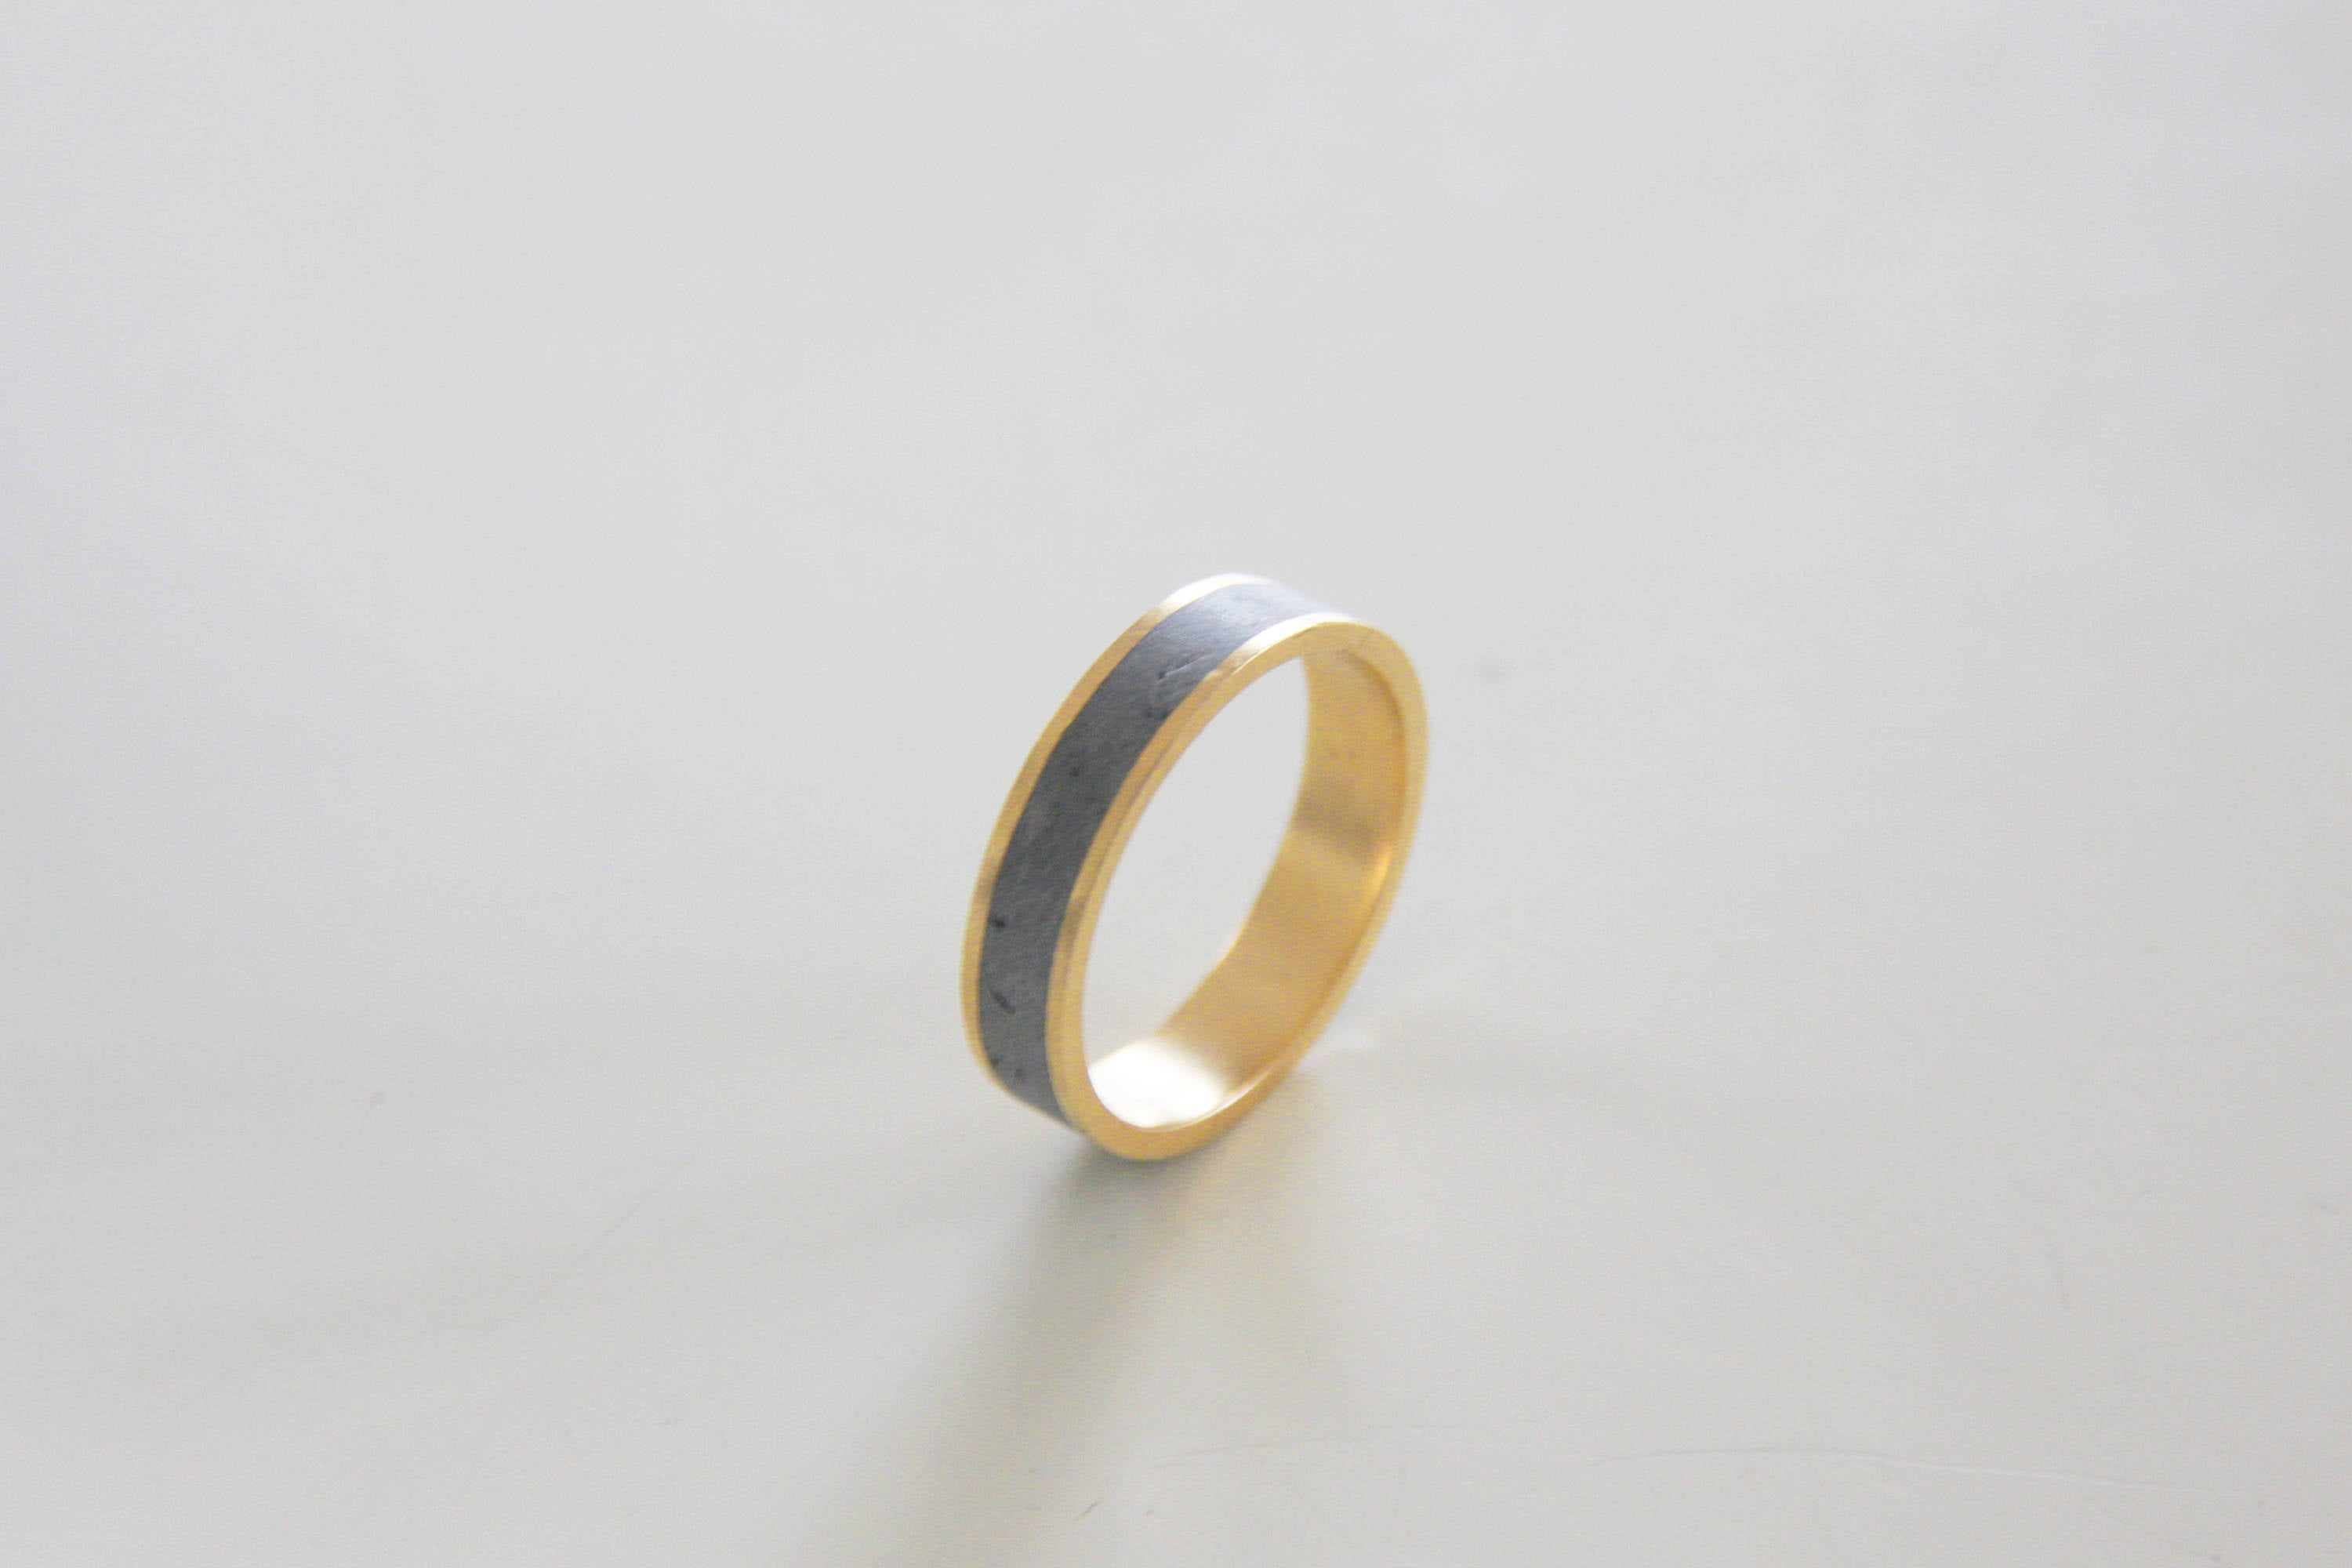 wedding band set, Couples Ring, wedding ring, unisex ring, concrete bands, Minimalist gold Ring, Contemporary ring, modern ring, unique ring - hs